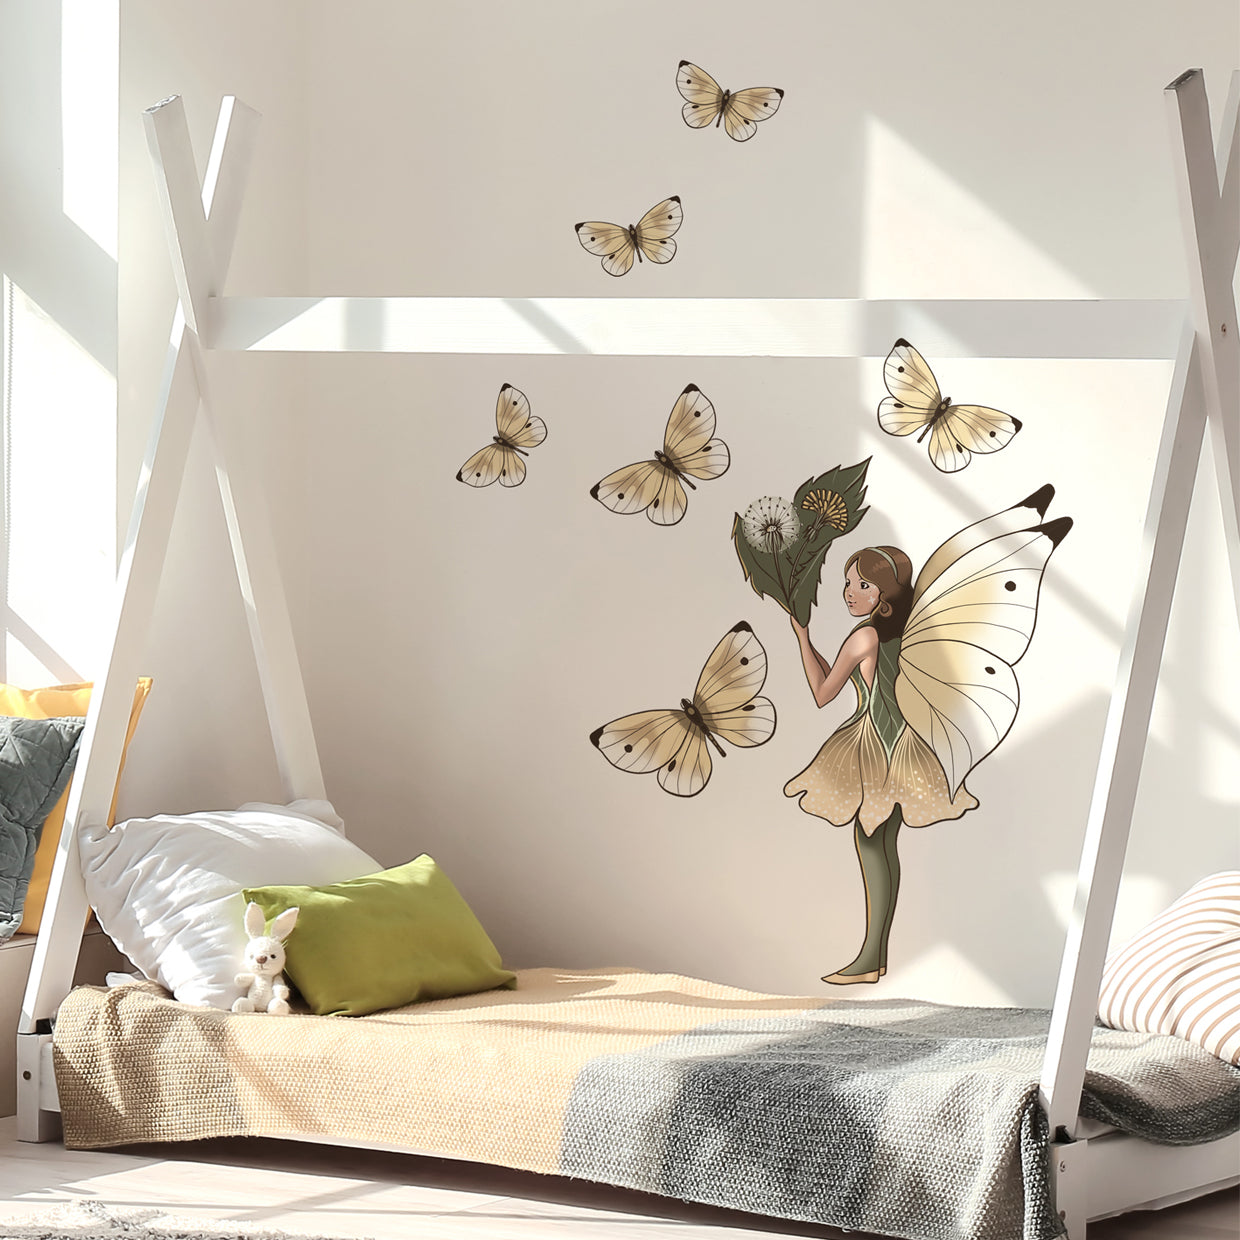 Fairy fabric wall decals